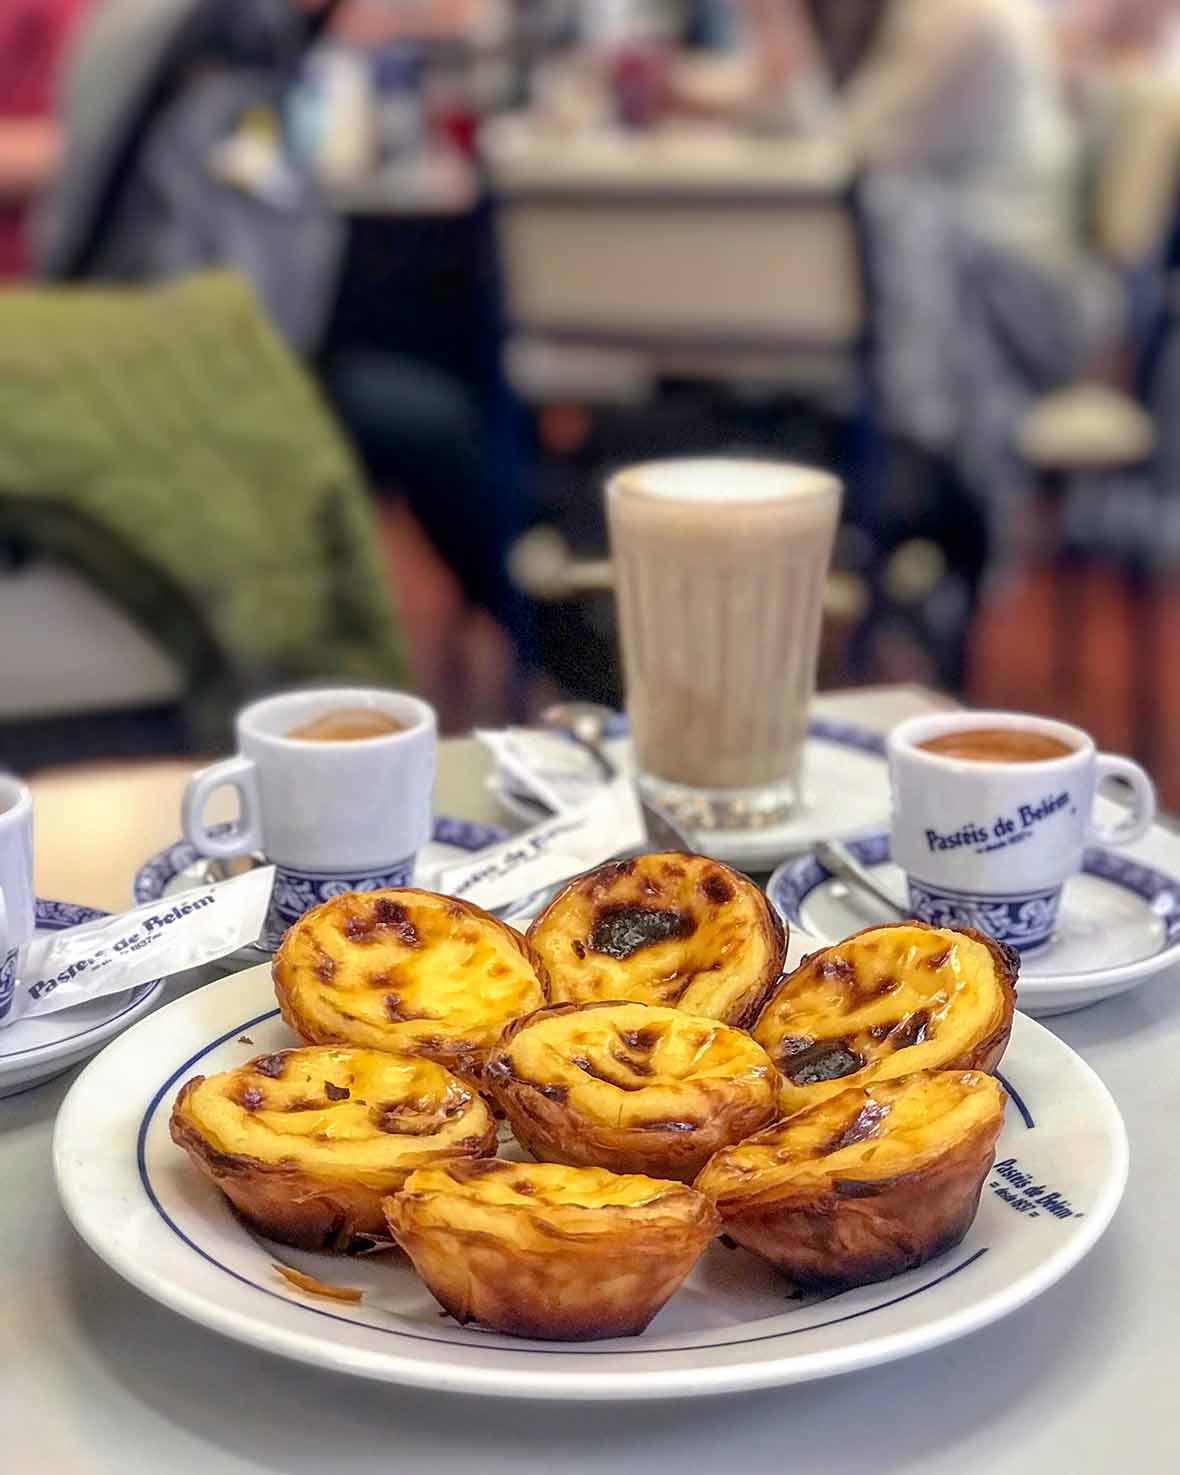 Seven pasteis de Belem, or Portuguese custard pastries, on a plate, with coffee cups nearby